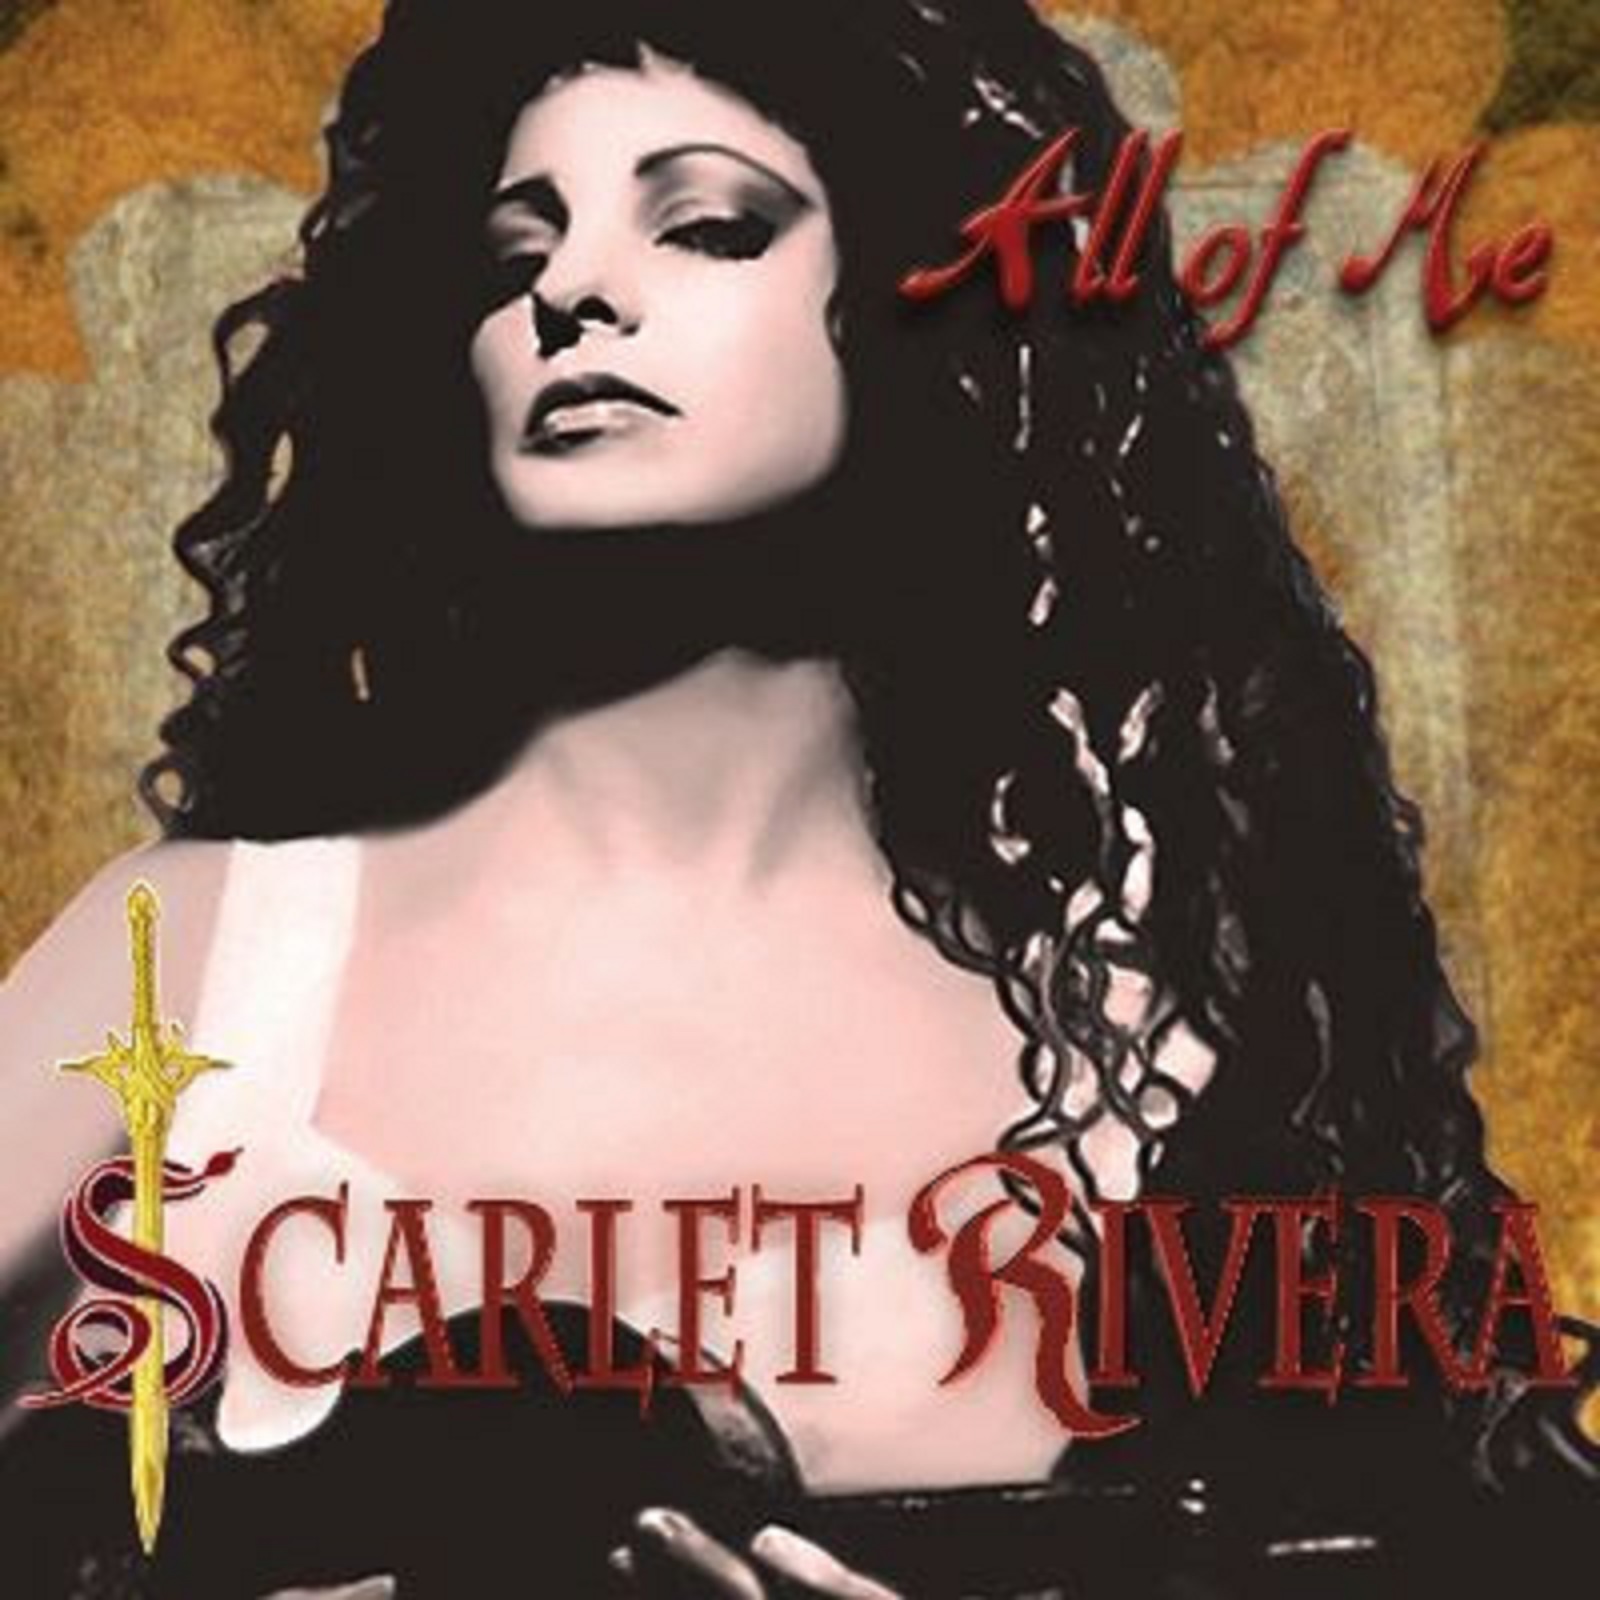 Scarlet Rivera to release EP “All of Me” April 17th